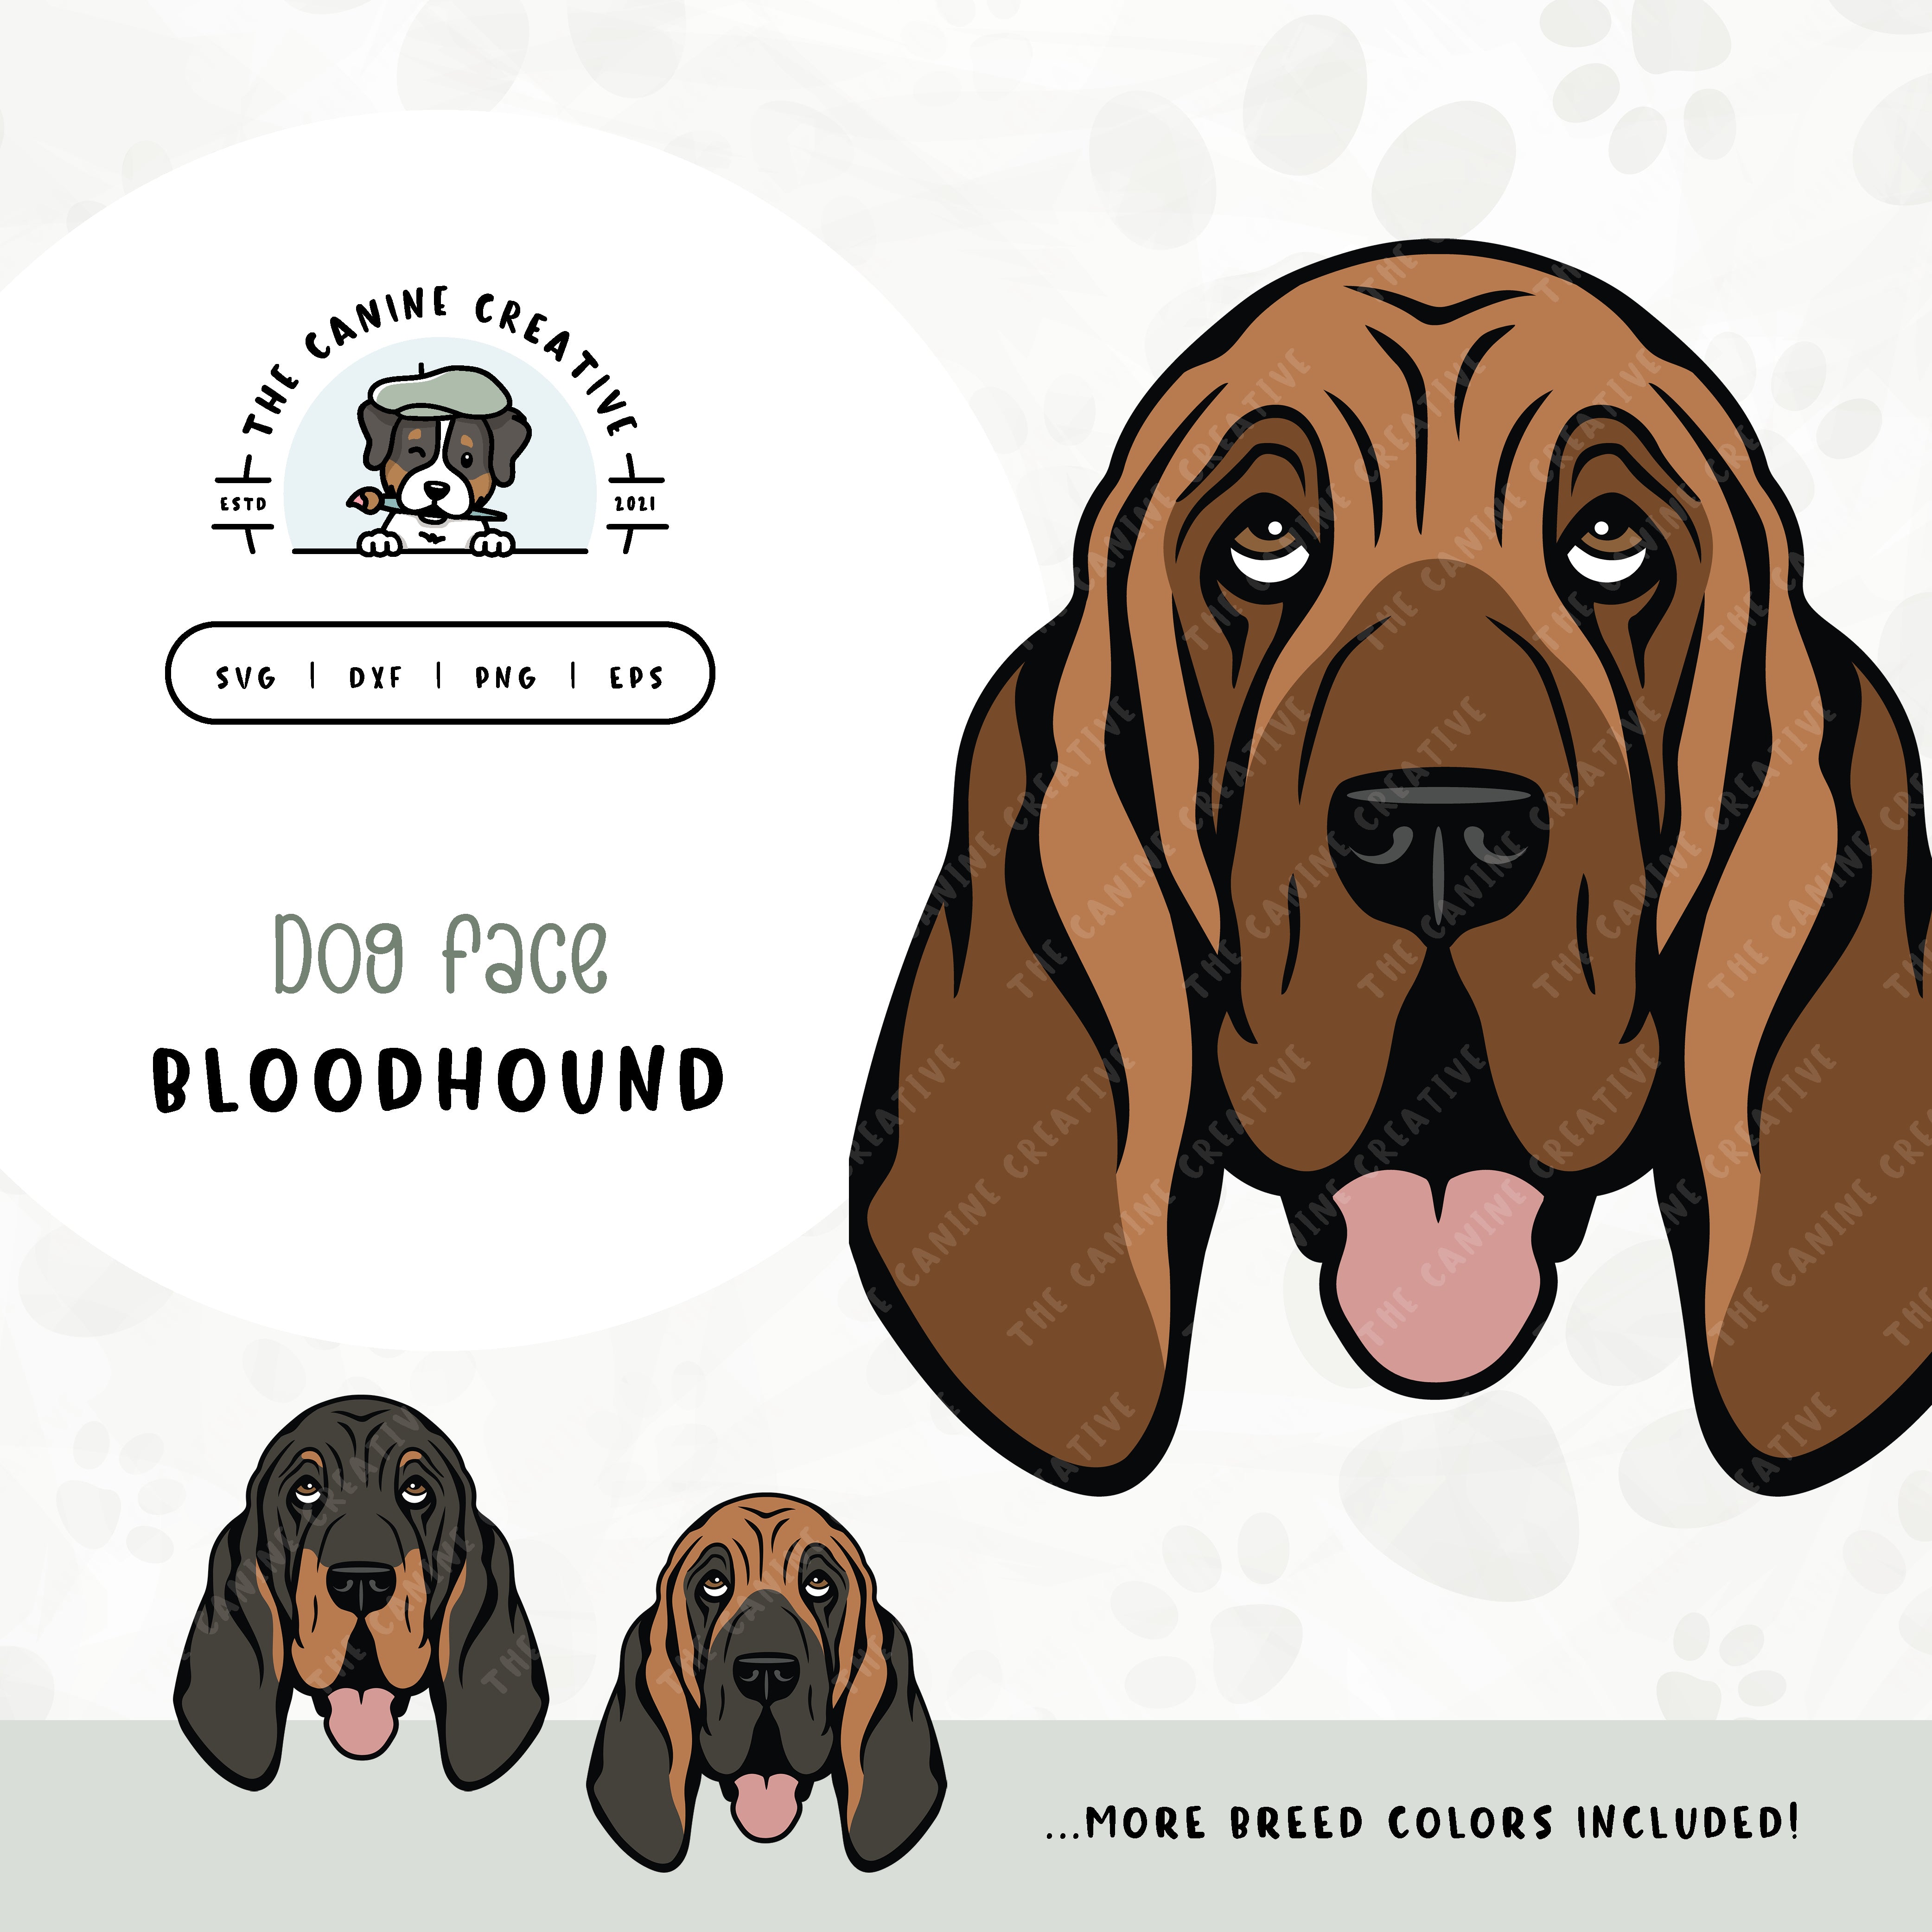 This illustrated design features a Bloodhound dog face. File formats include: SVG, DXF, PNG, and EPS.